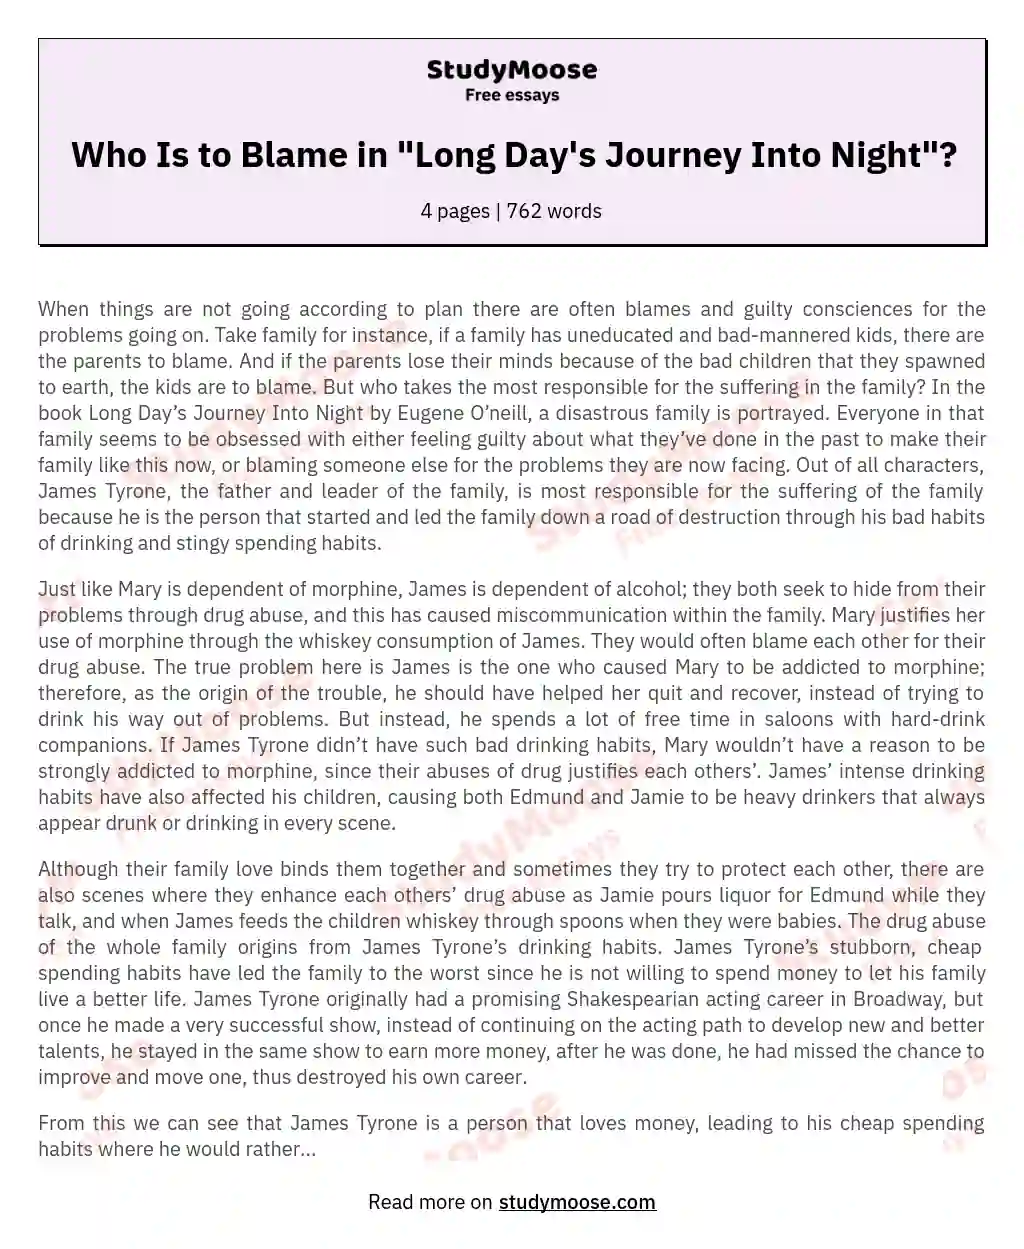 Who Is to Blame in "Long Day's Journey Into Night"? essay